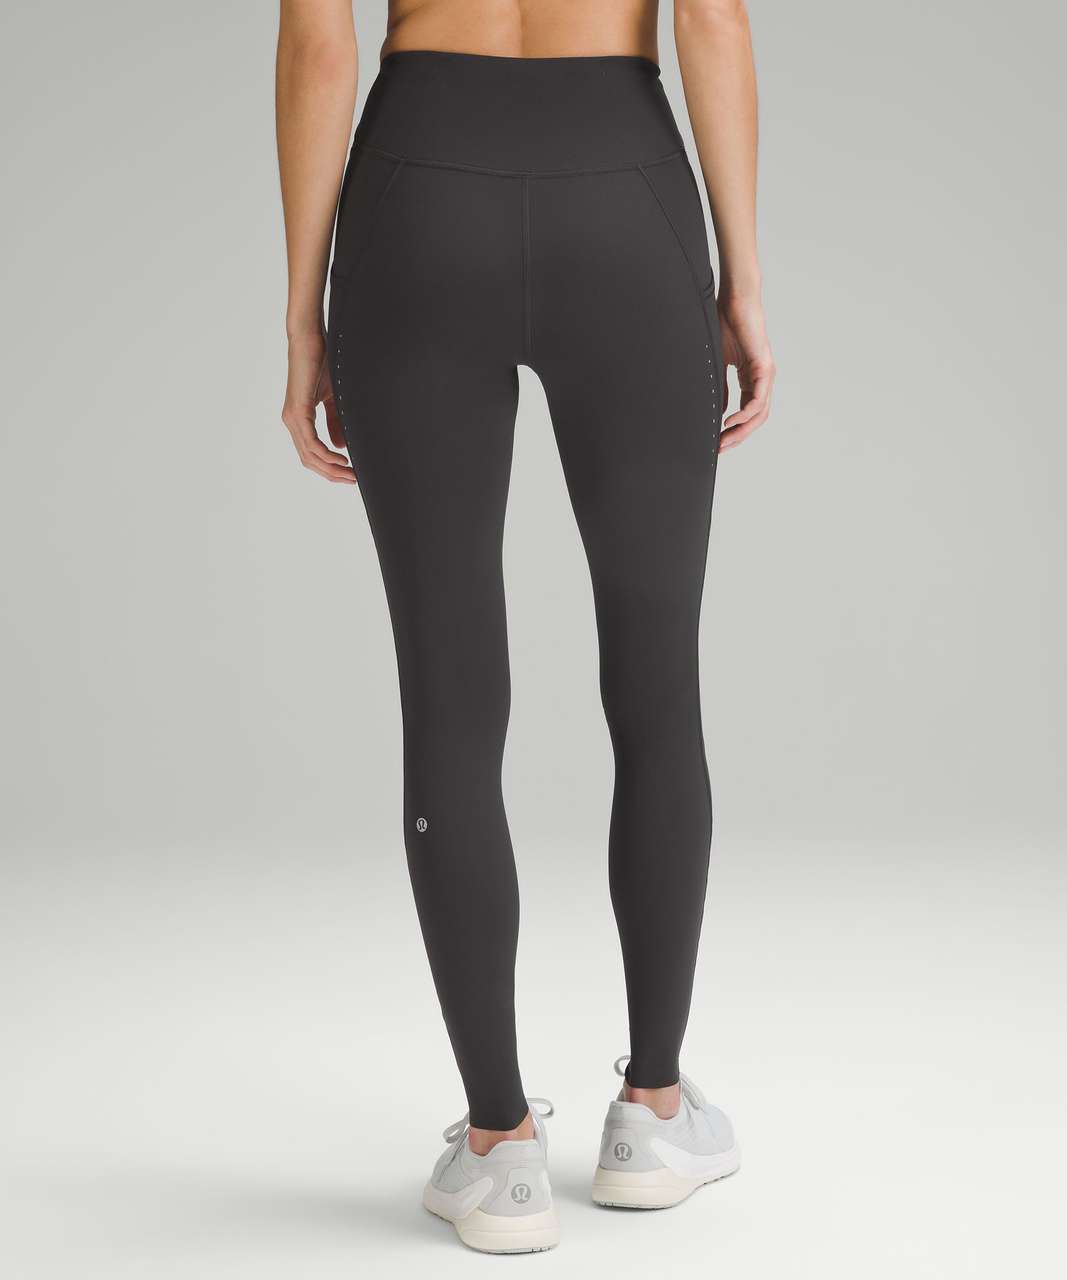 Lululemon Fast and Free Tight 28 *Non-Reflective - Graphite Grey